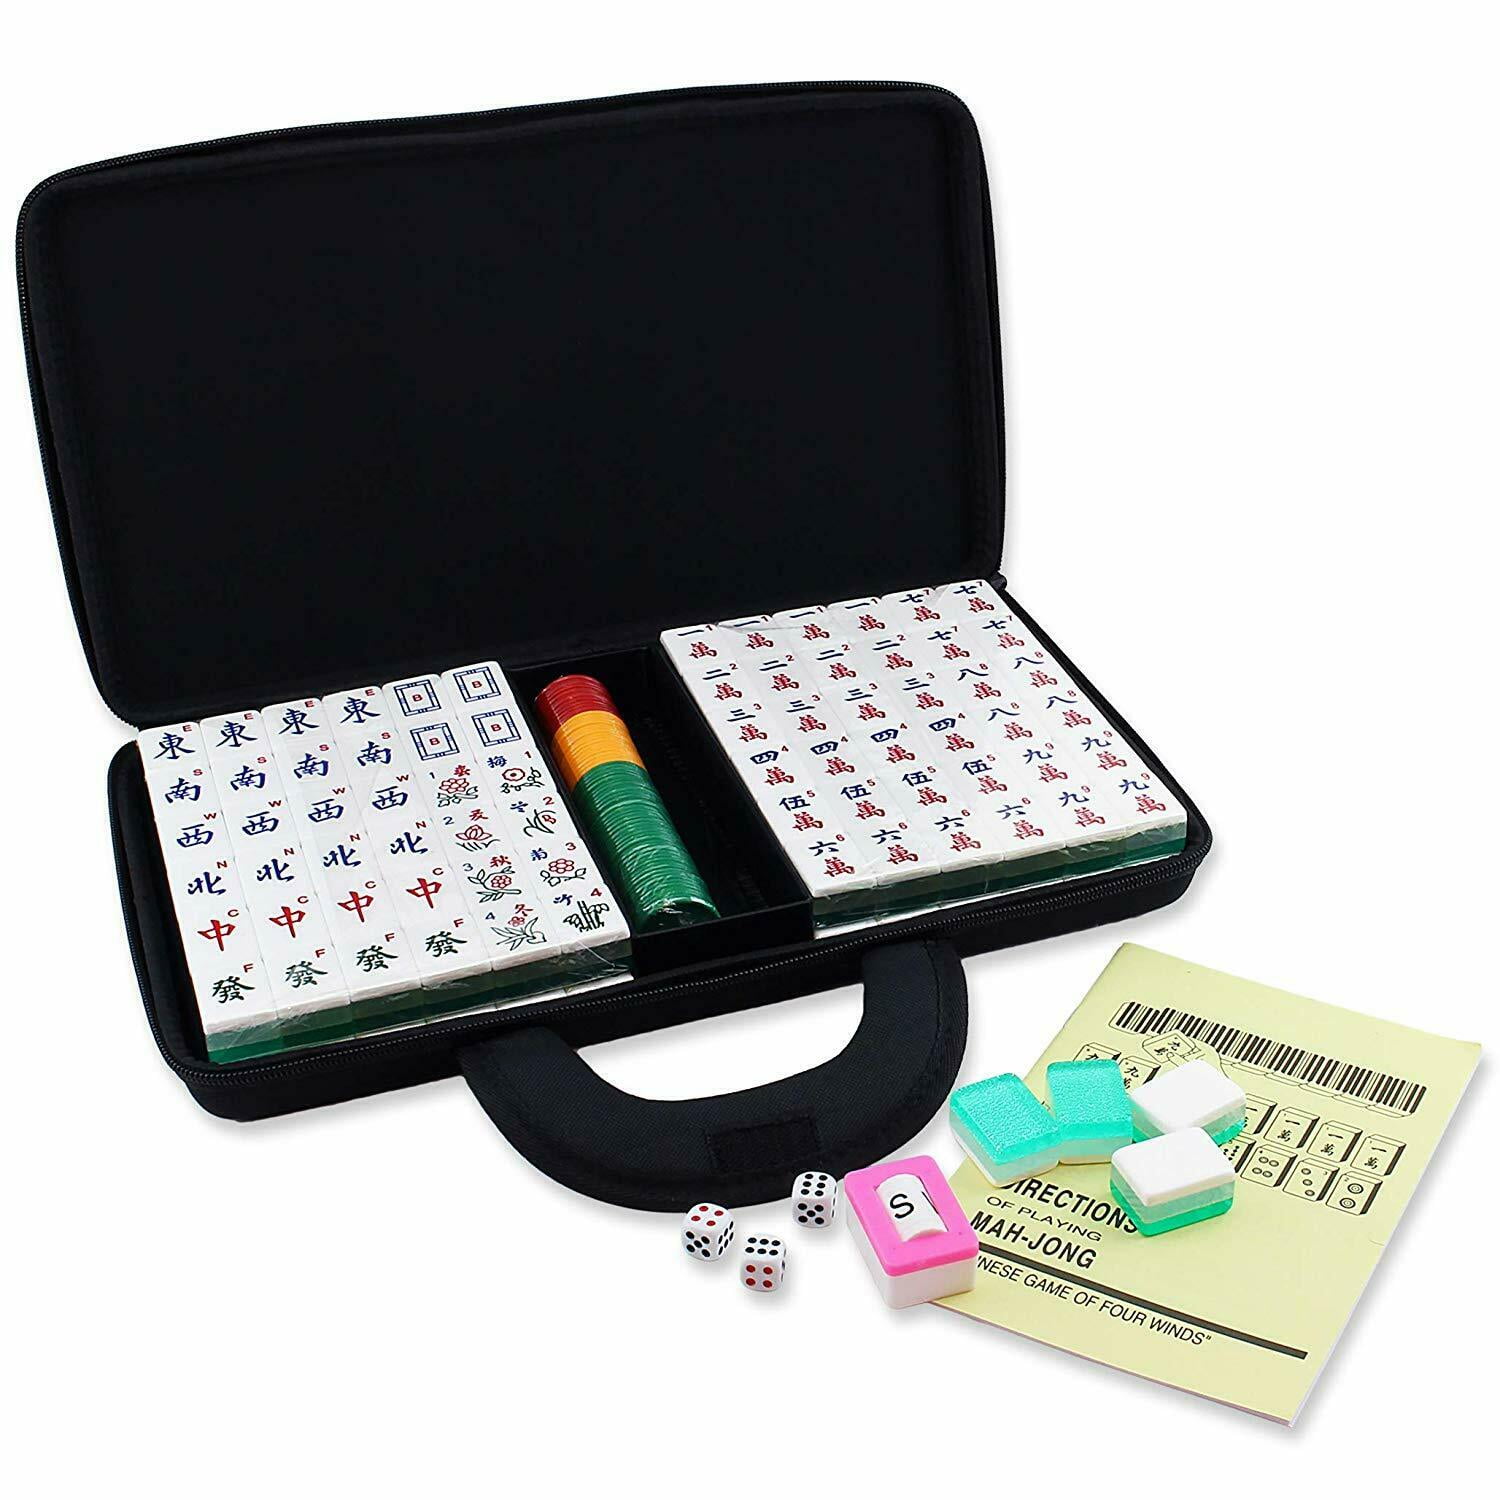 IRONWALLS Chinese Mahjong Mah Jongg Game Set with 144 Mini Tiles Dot Dice Leather Box Extra White Tiles for Travel Family Game